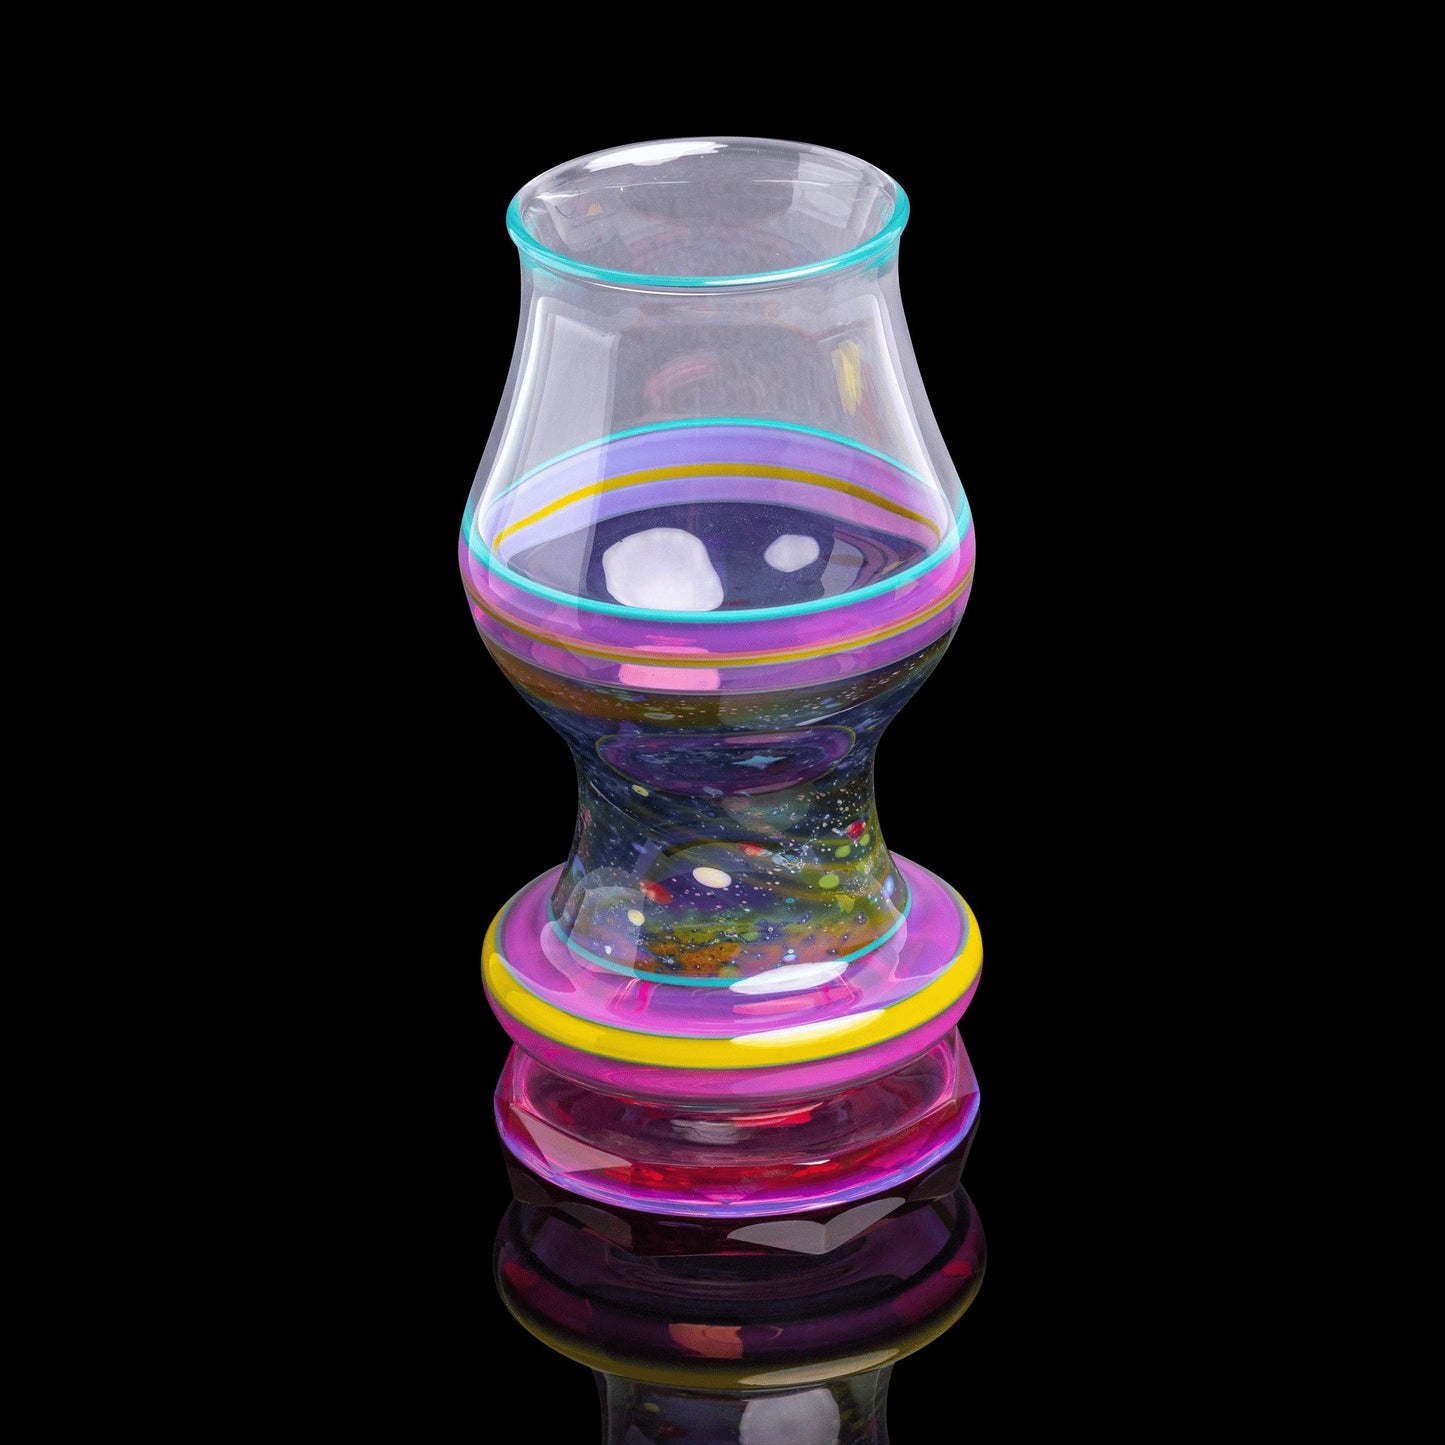 exclusive design of the Captains Cup Collab by Matt A x Nathan (N8) Miers (2022 Drop)